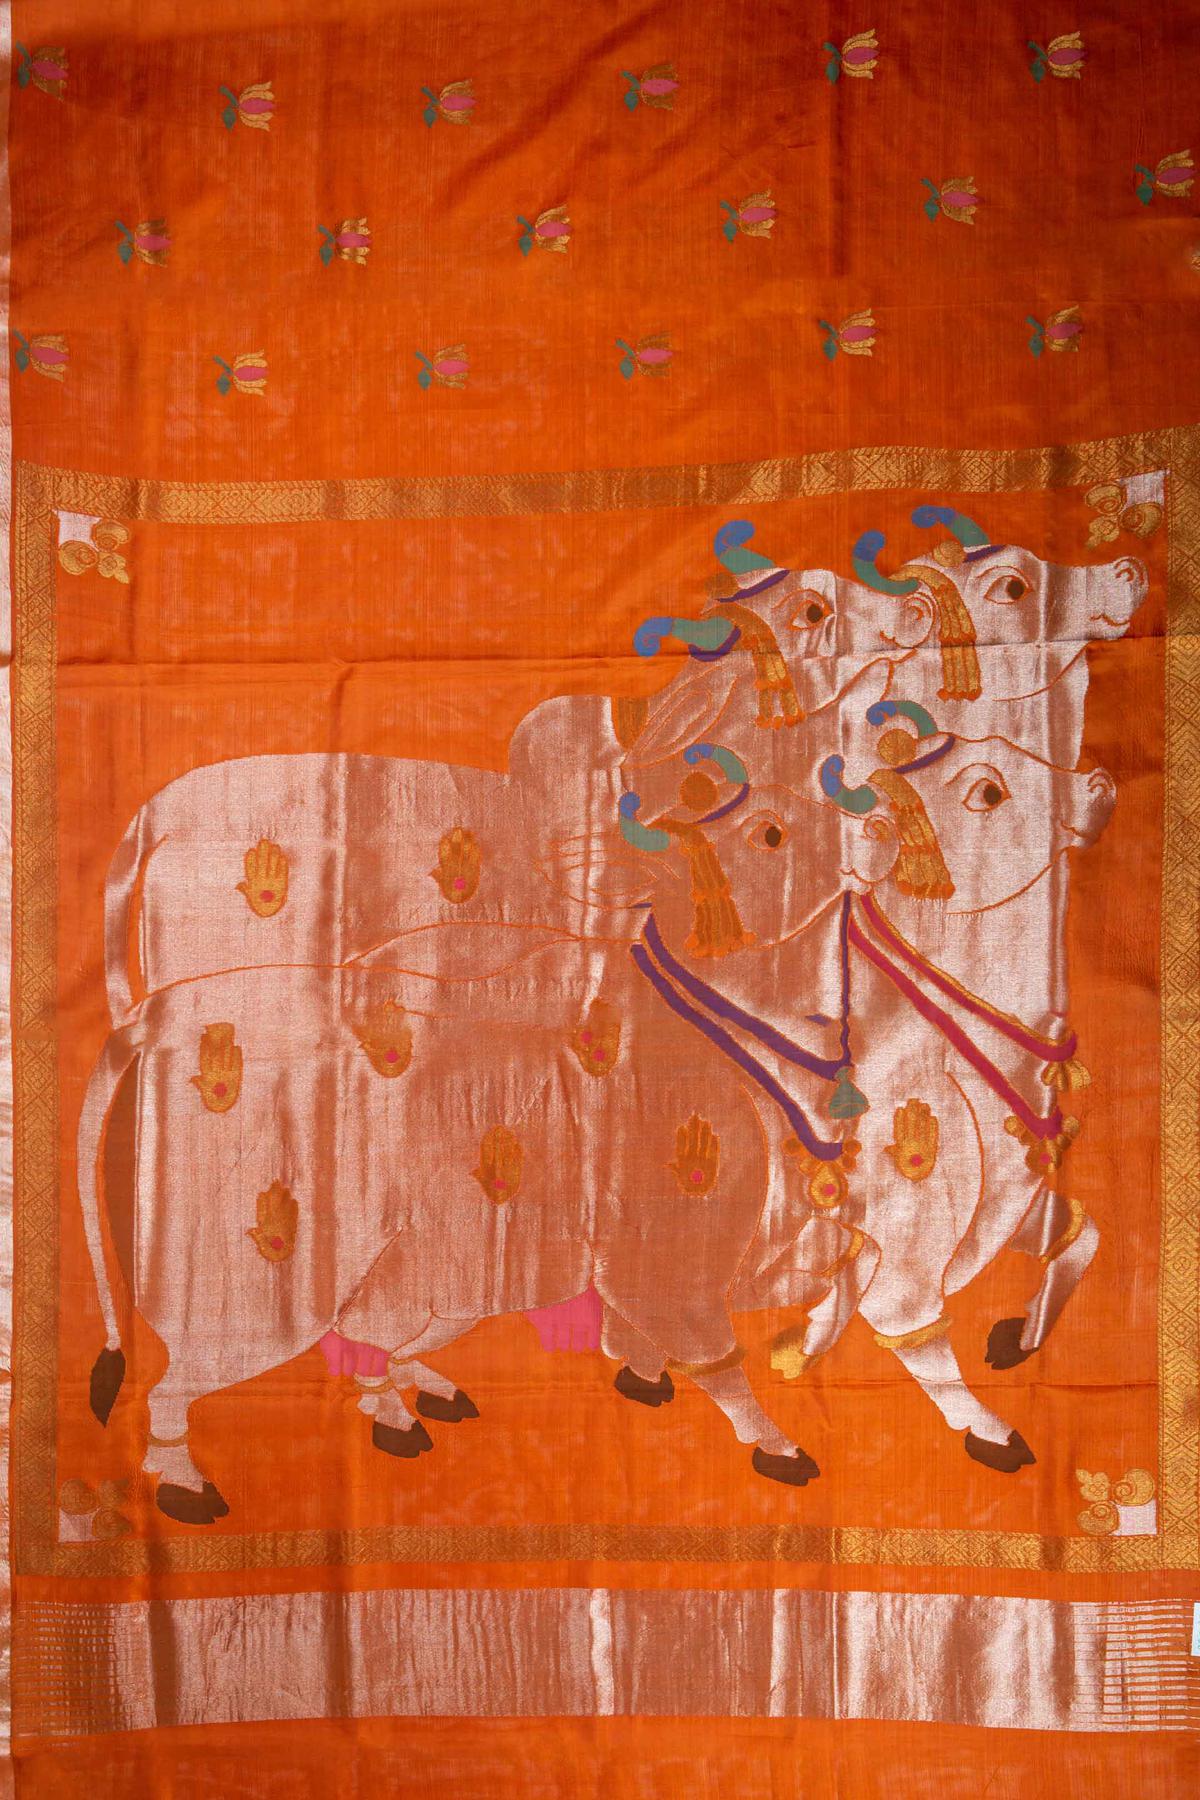 The cow is a traditional motif seen in Pichwai paintings